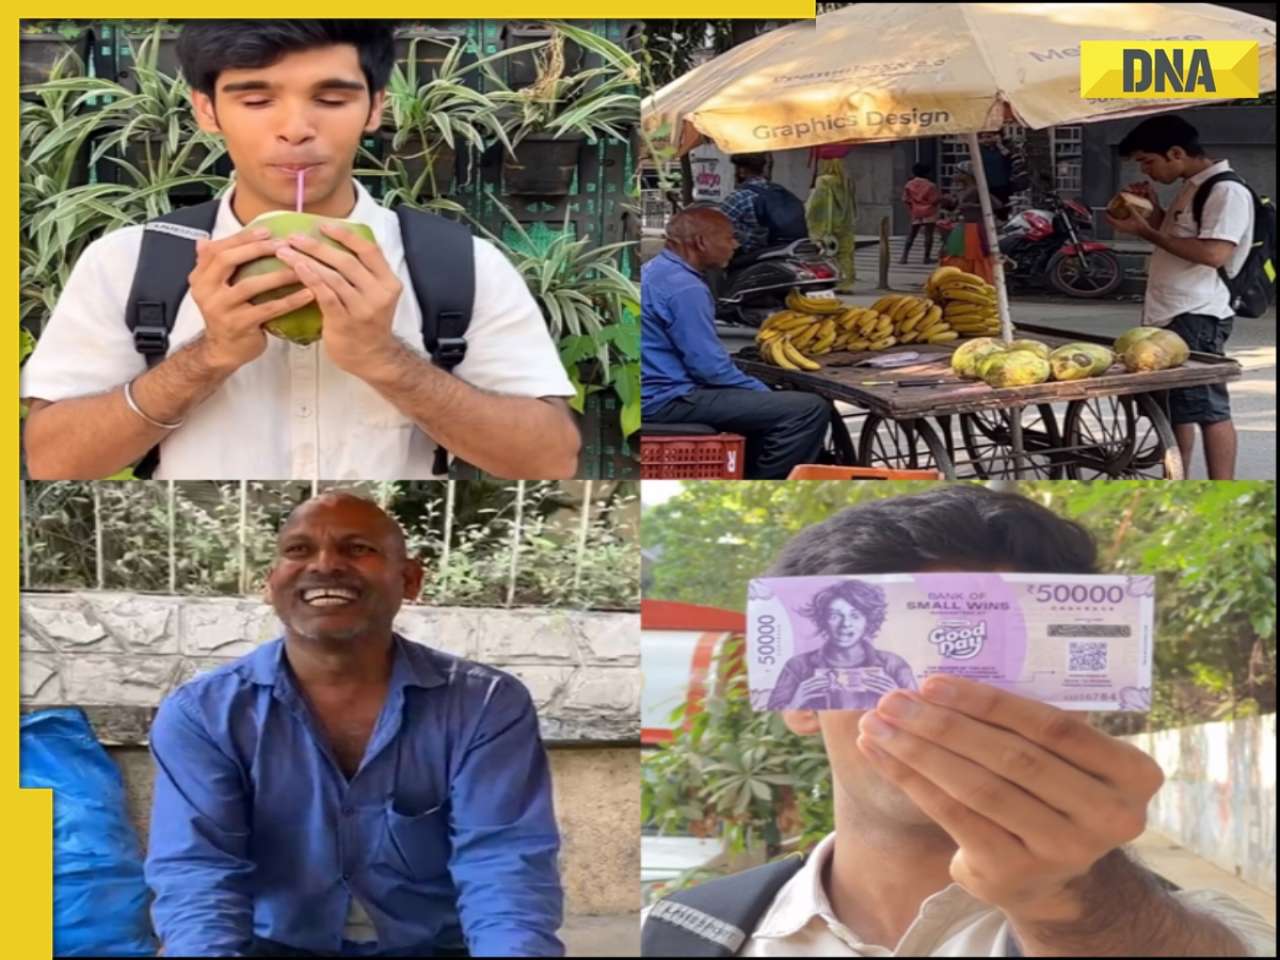 Mumbai creator pays Rs 50000 good day note to a coconut vendor